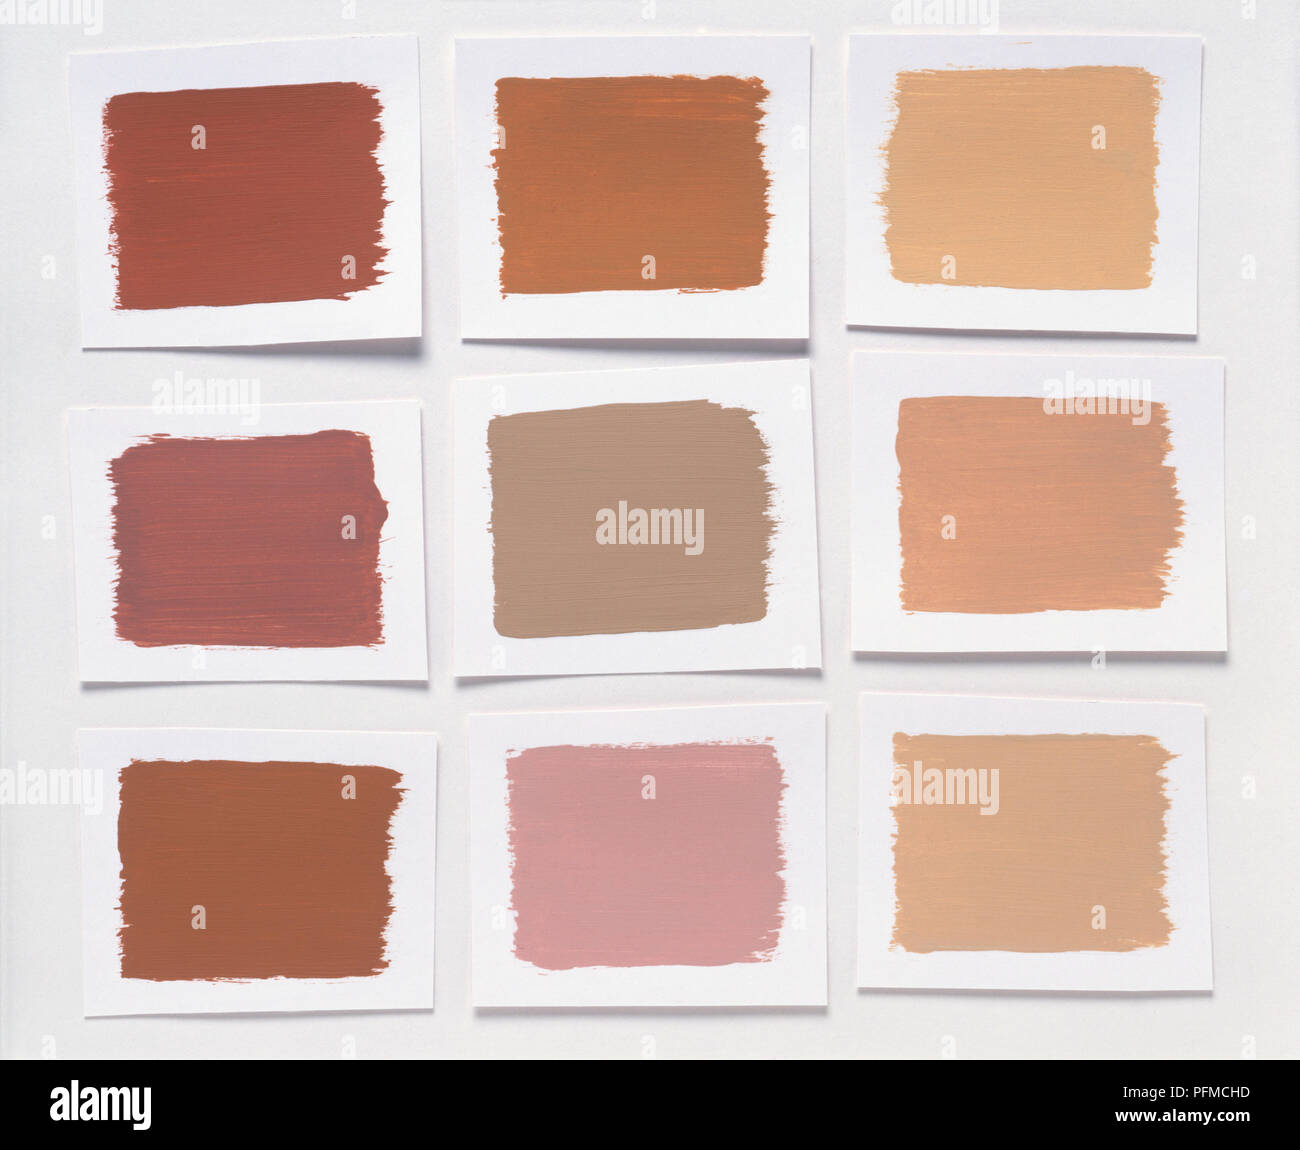 Colour samples of shades of terracotta, close-up Stock Photo - Alamy